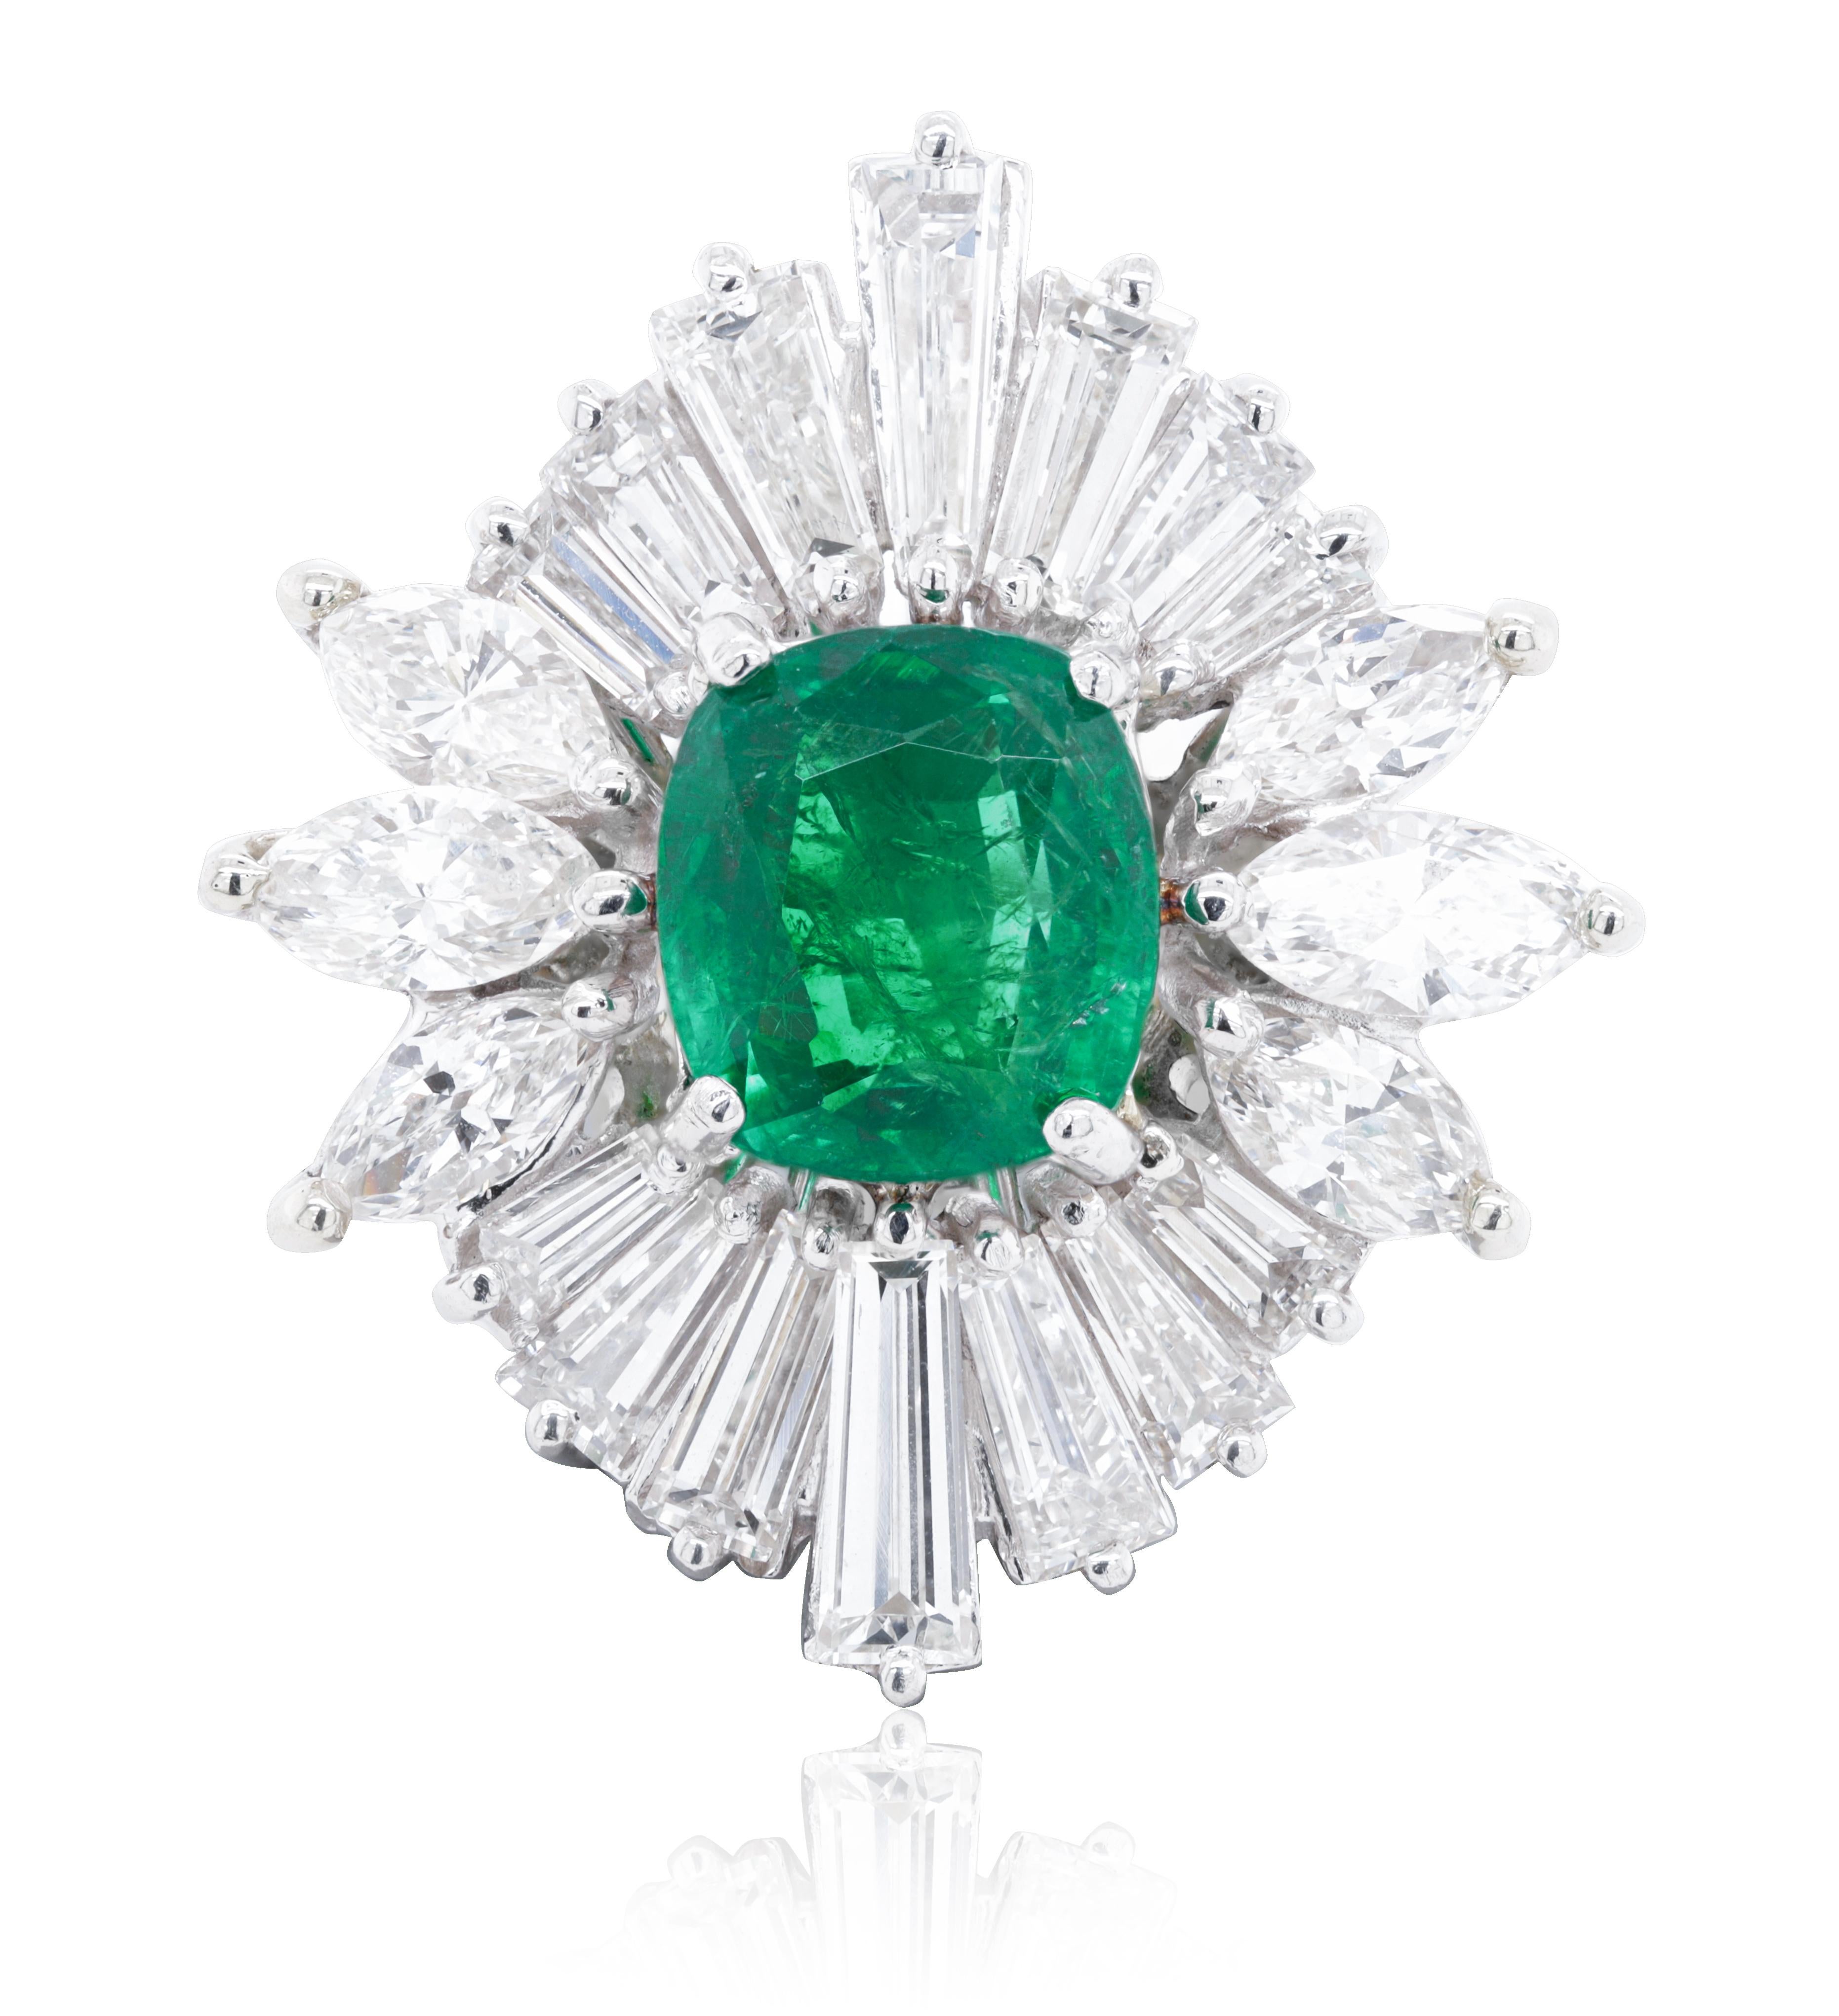 Platinum Green Emerald Diamond Ring With 2.82 Cushion Cut Emerald Surrounded By Baguettes And Marque Diamonds (6.50ct)  All The Way Around.
